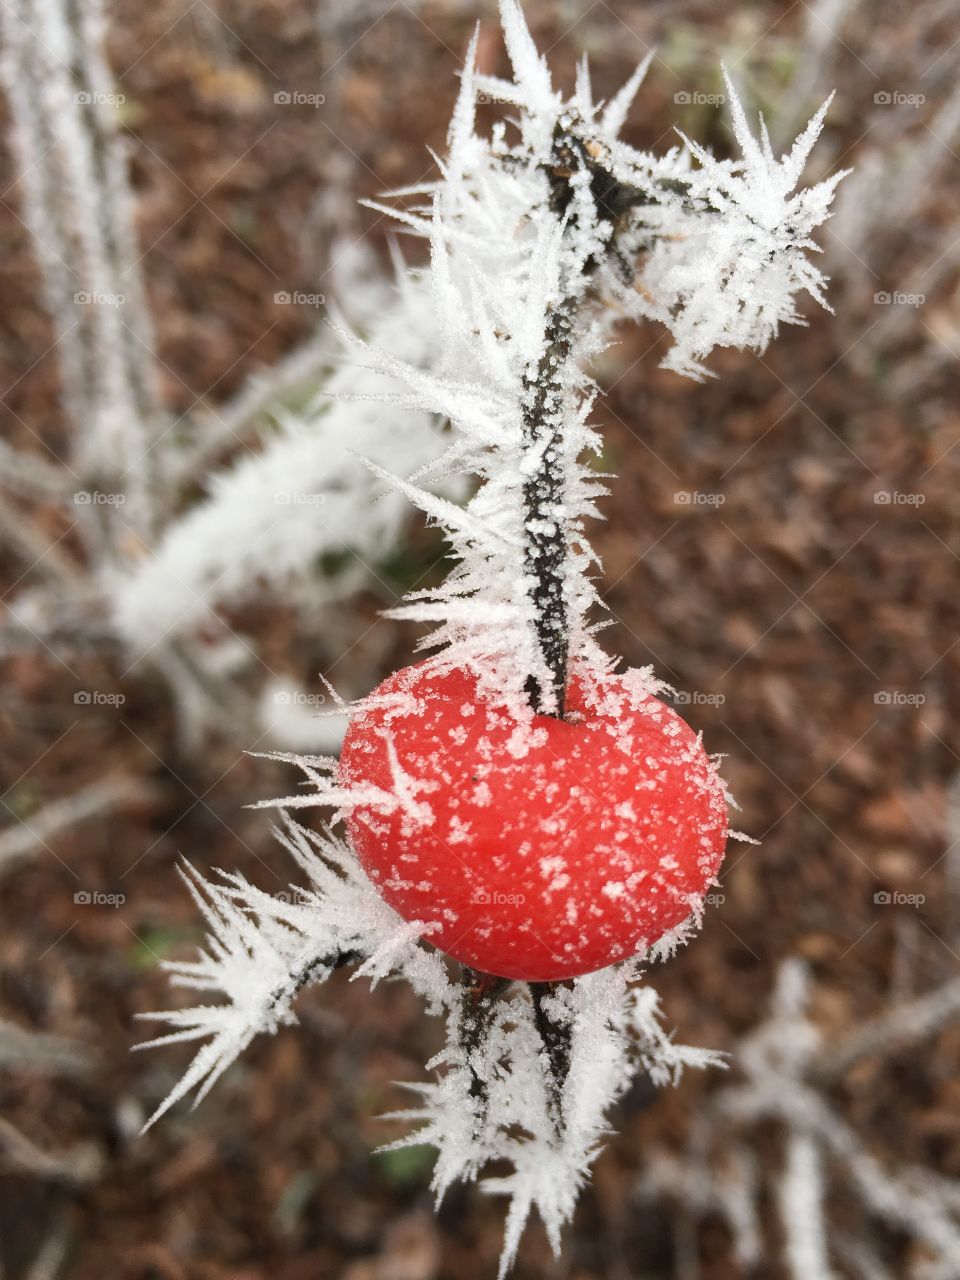 Beauty in nature on a freezing cold day 